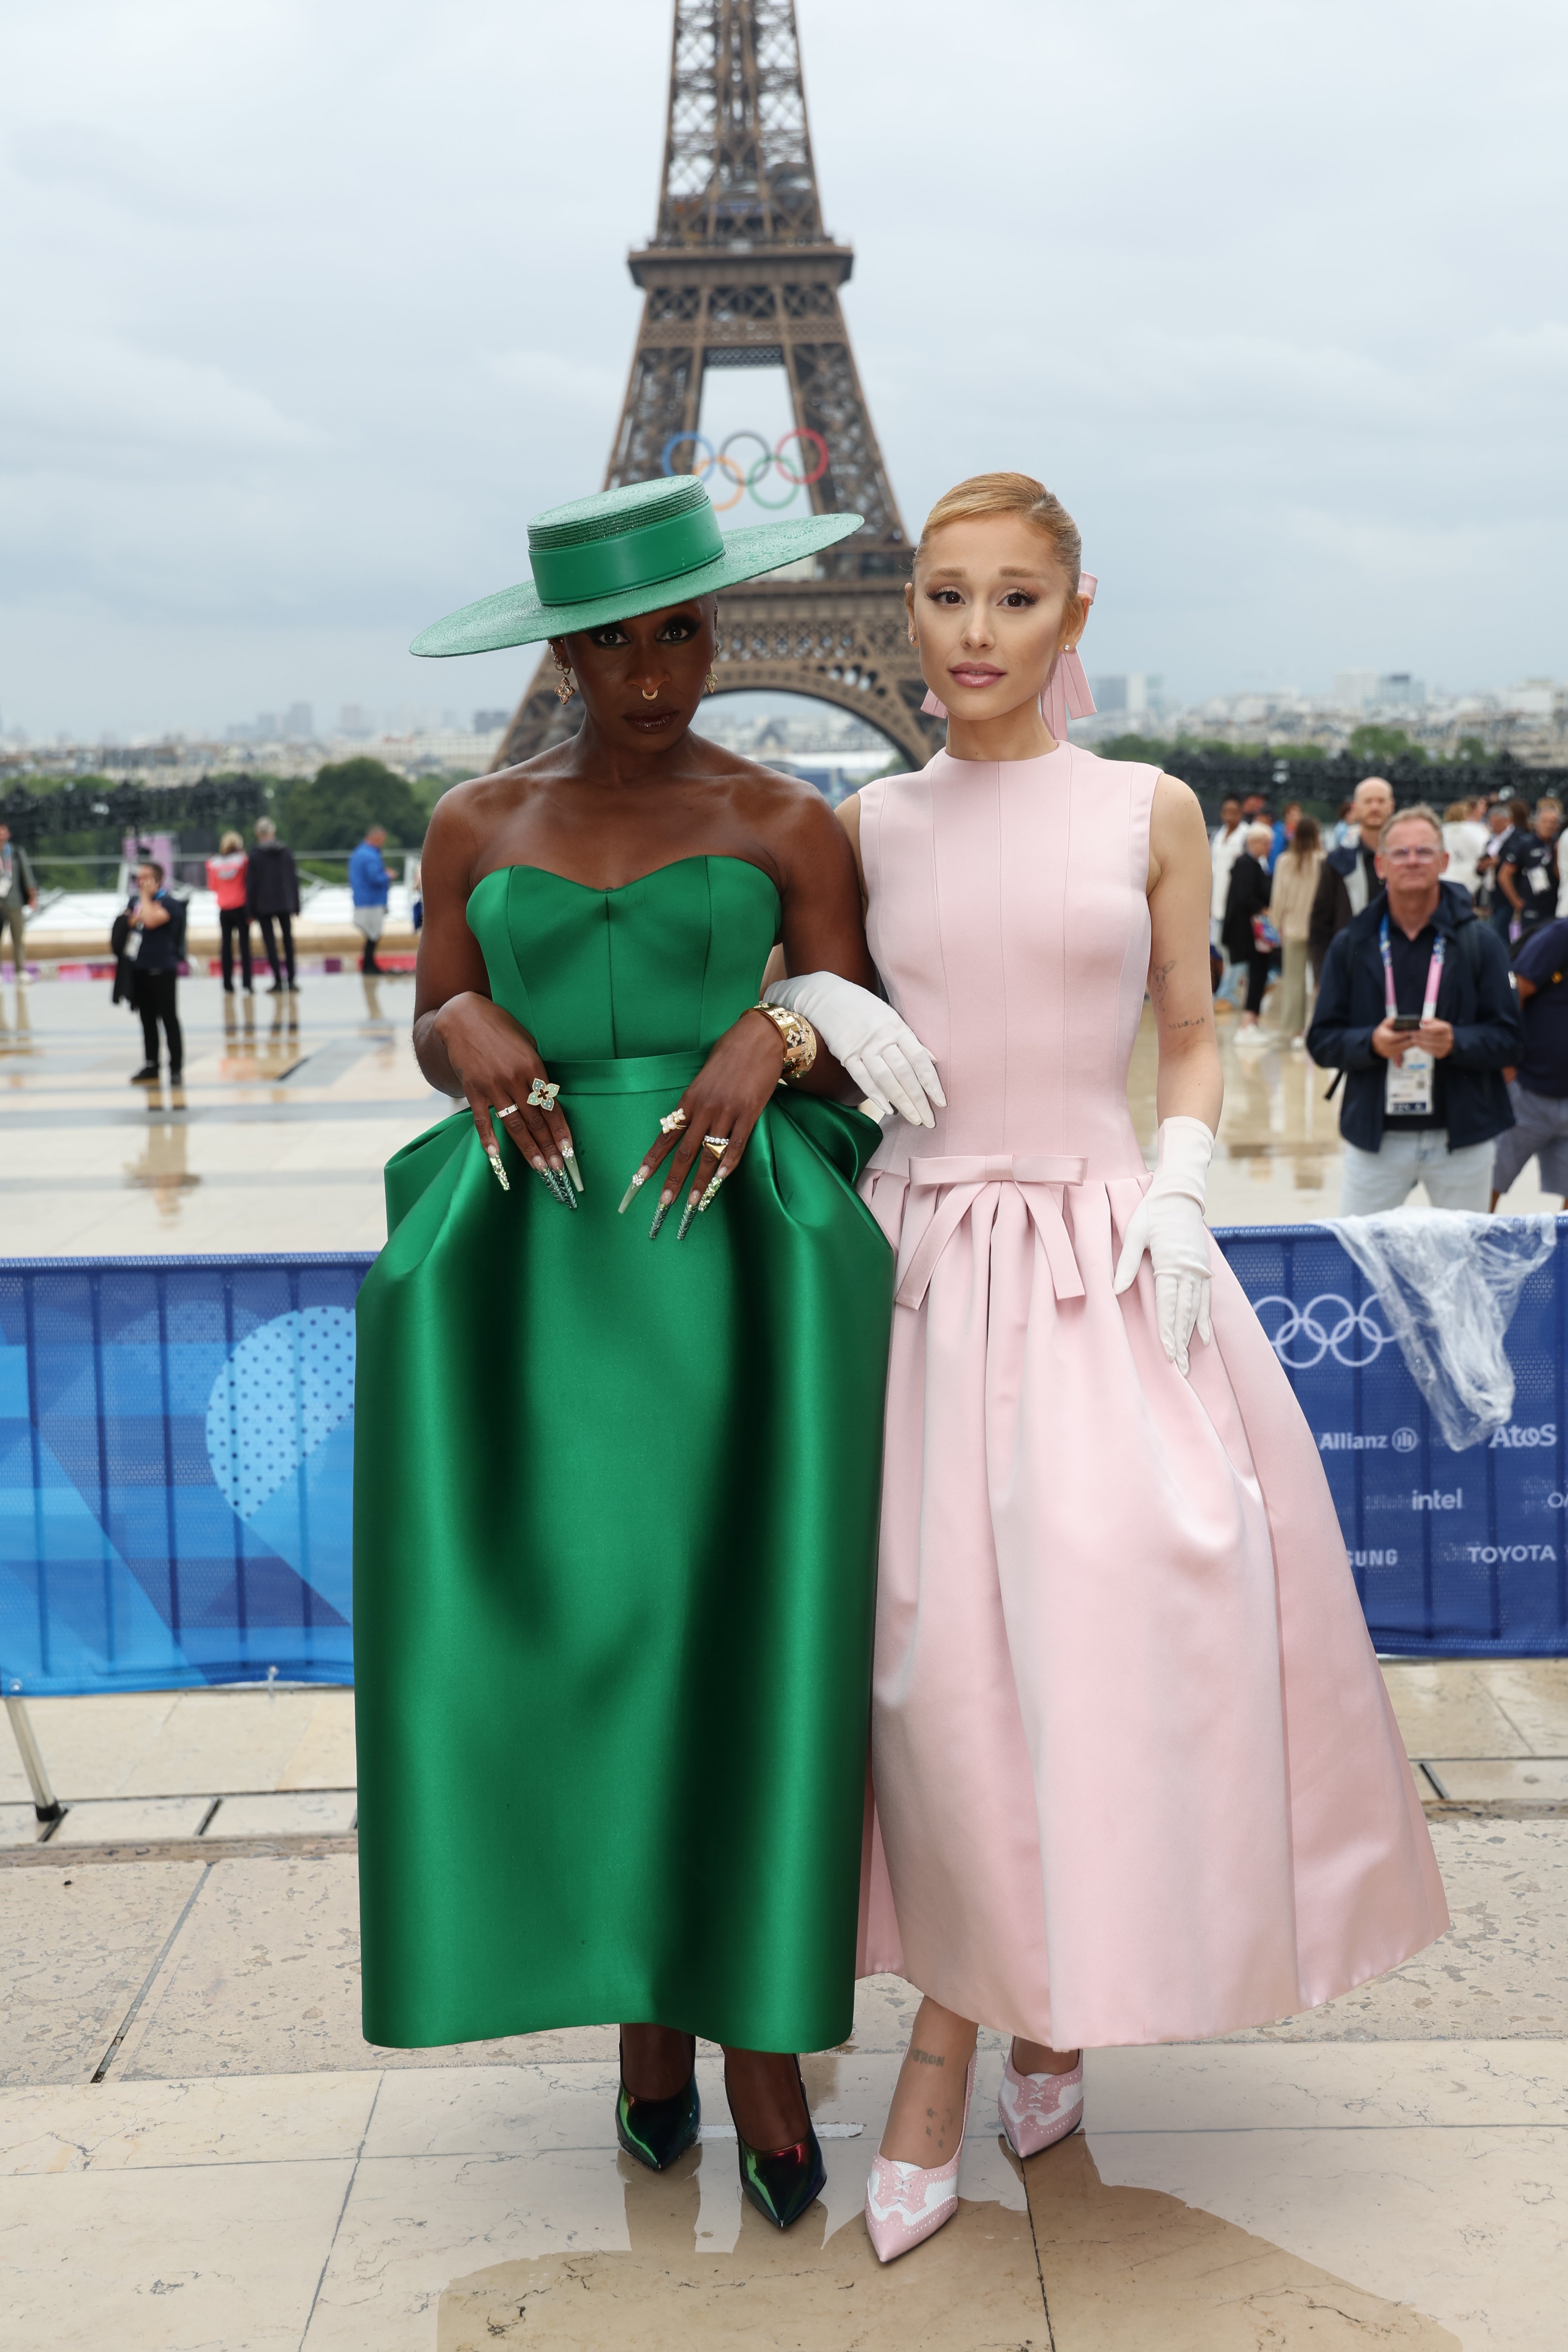 In true Wicked form, the two musical stars donned emerald green (Erivo) and baby pink (Grande) gowns, subtly promoting their upcoming film adaptation of the beloved Broadway show.